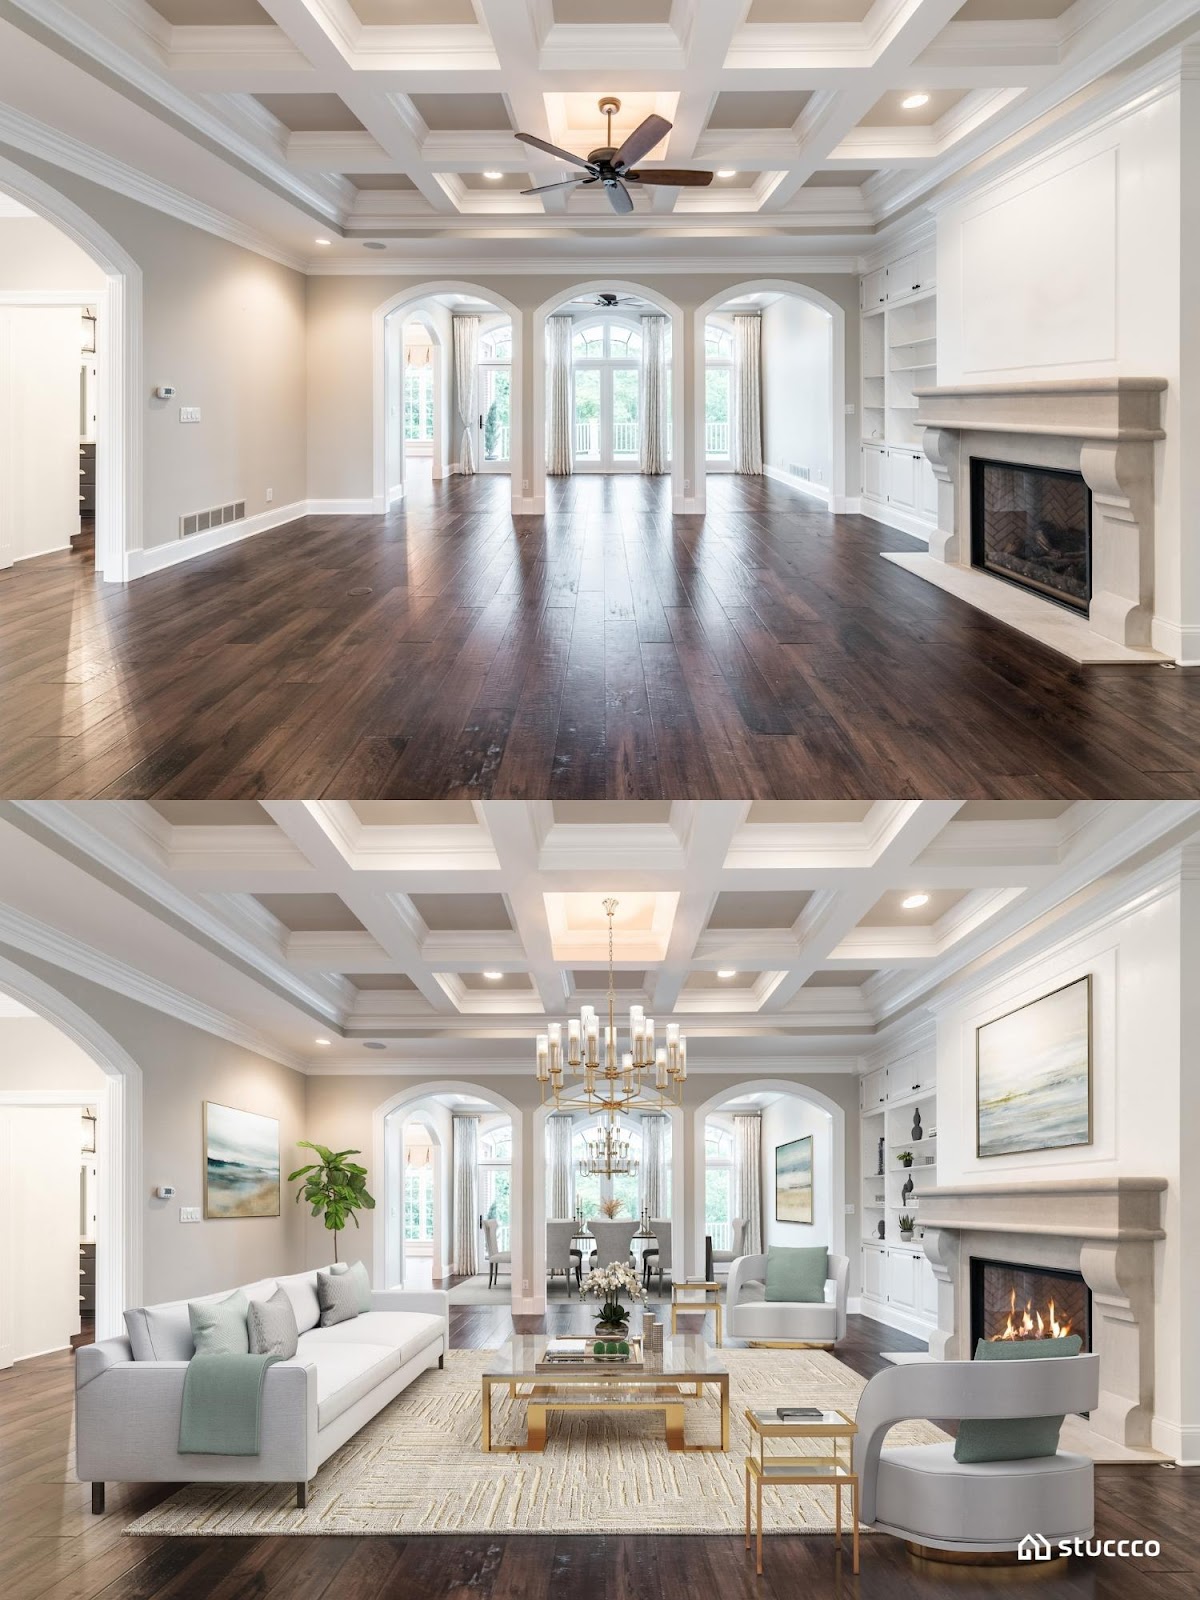 Virtual staging for high end real estate sales